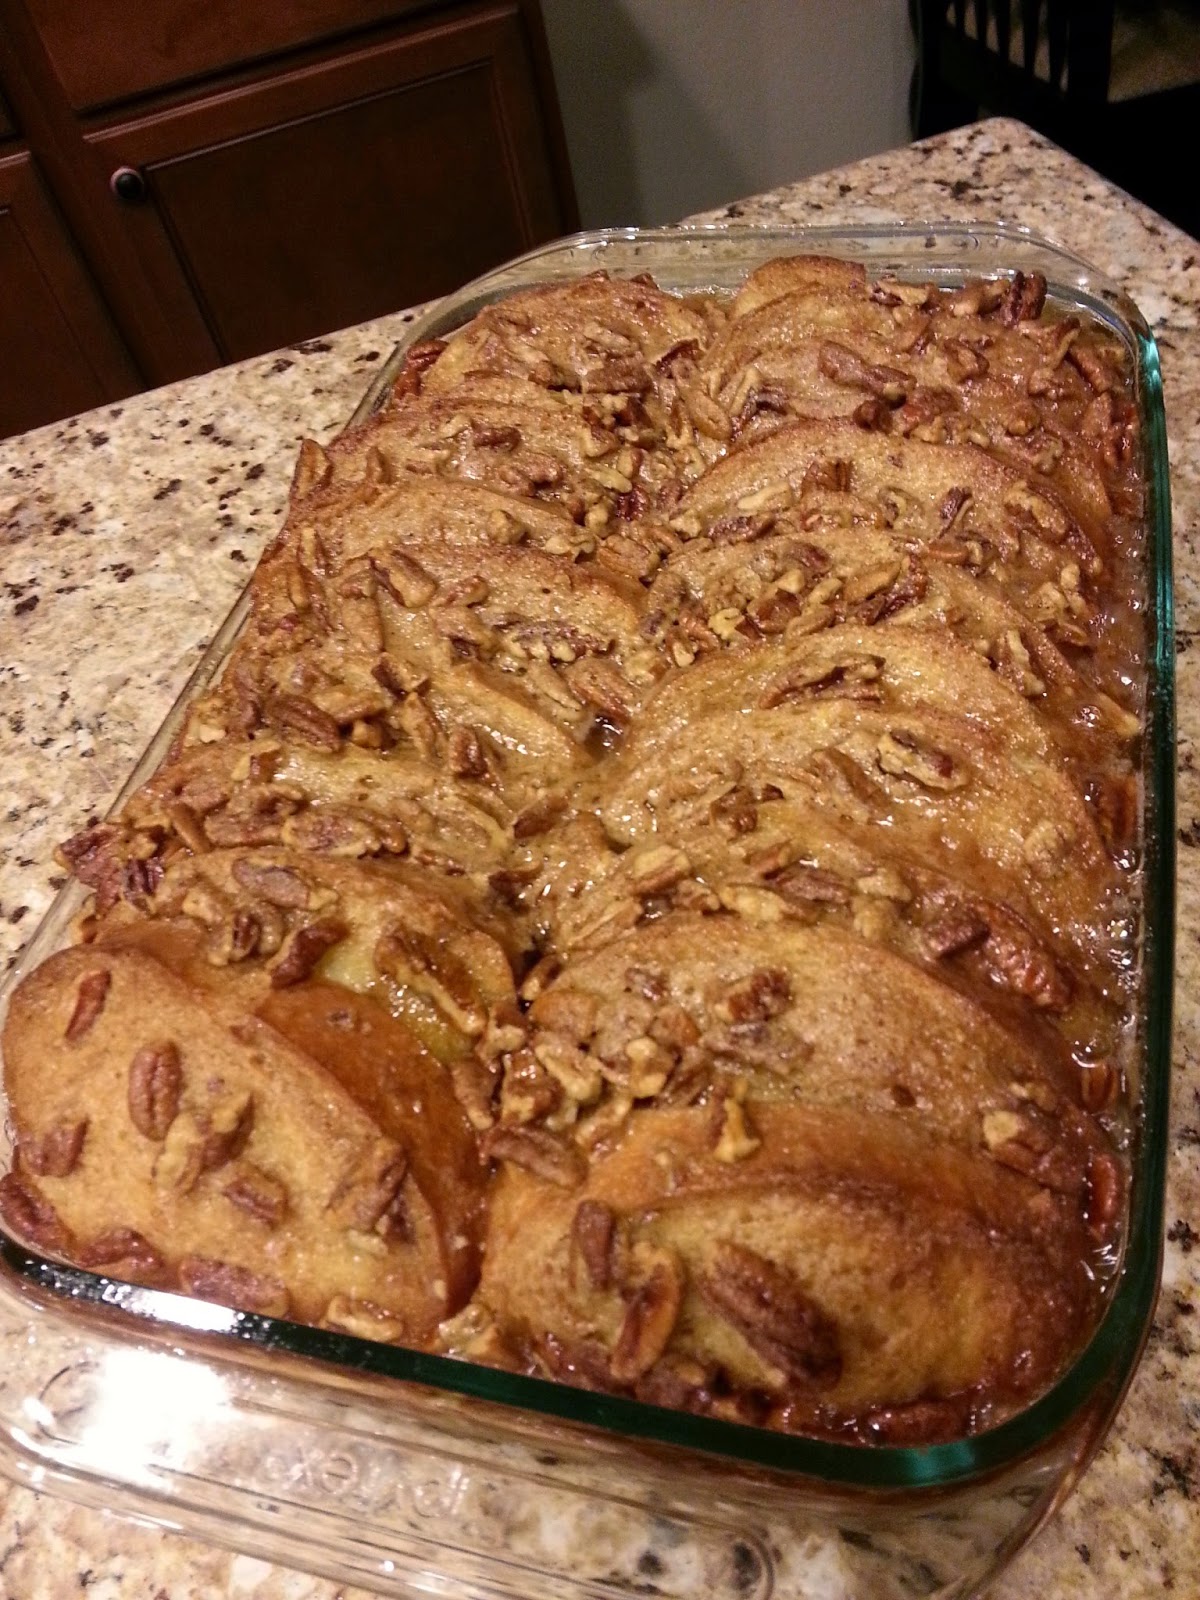 Paula Deen's Pecan Praline Baked French Toast Bring Something New to